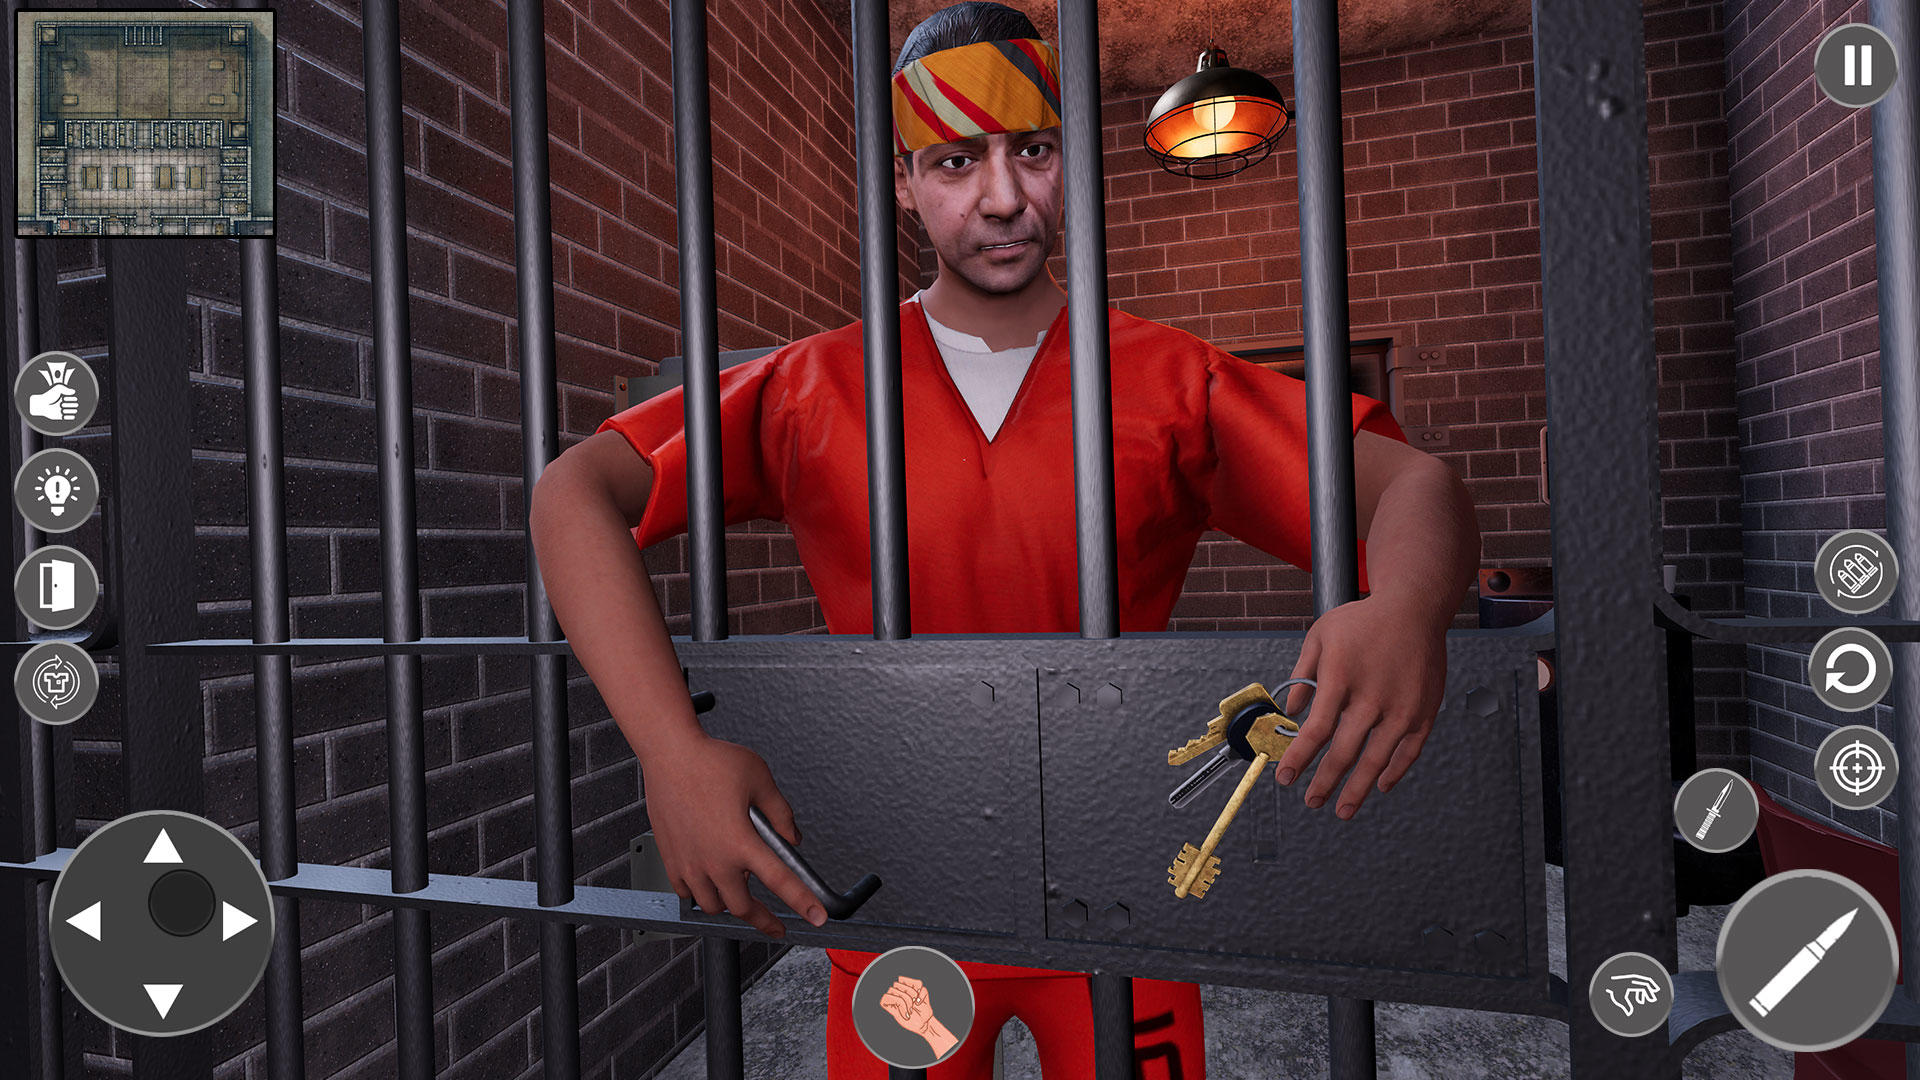 Prison Break: Jail Escape Game::Appstore for Android